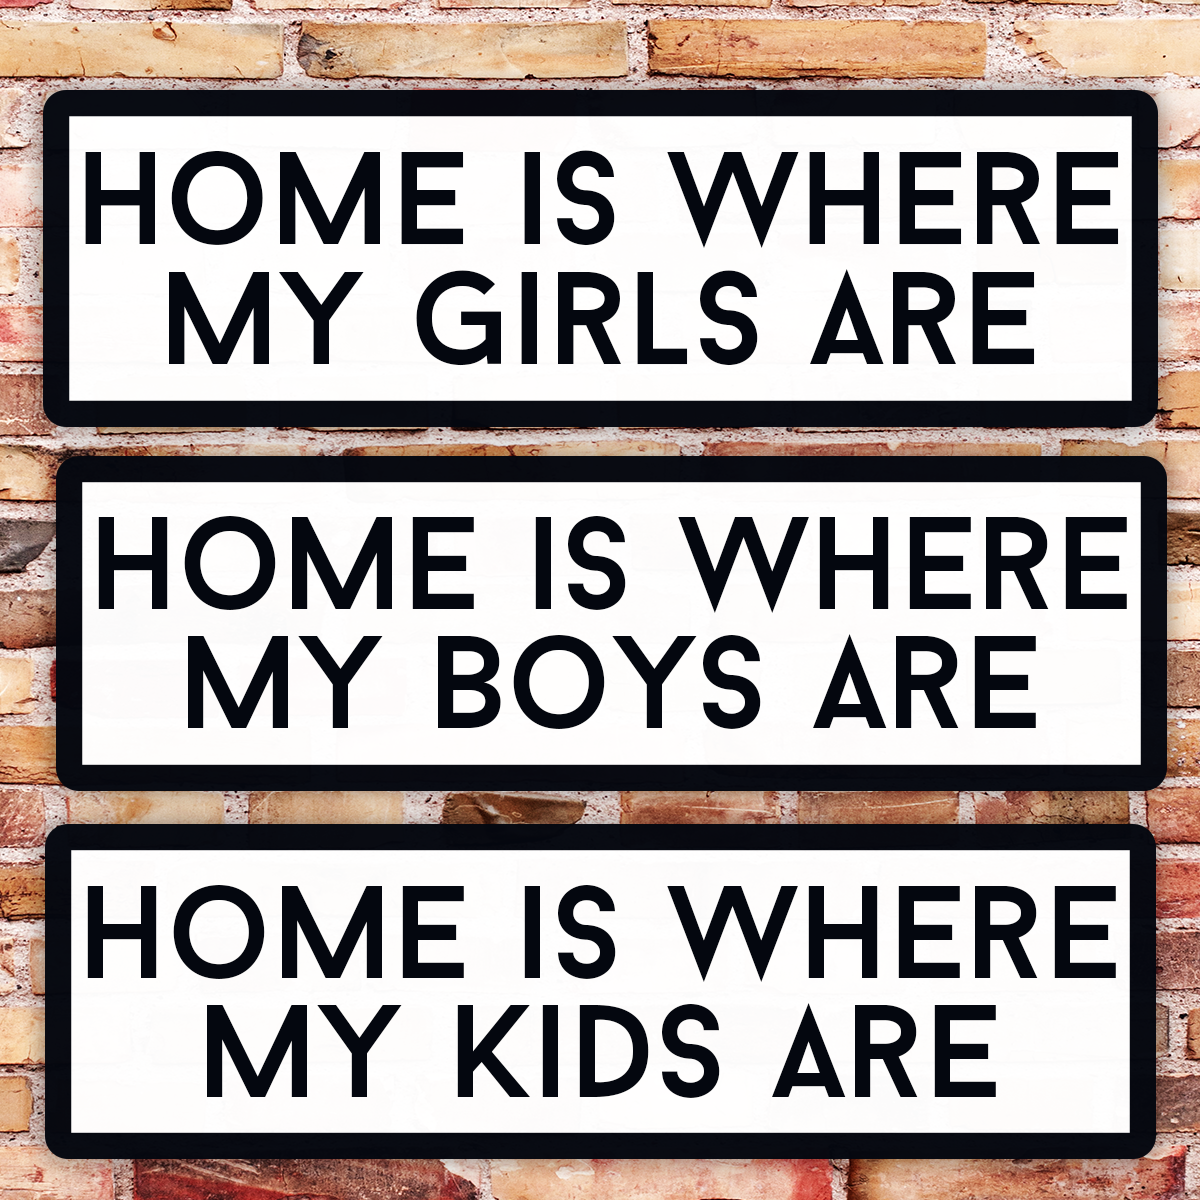 Home is where ... Street Sign